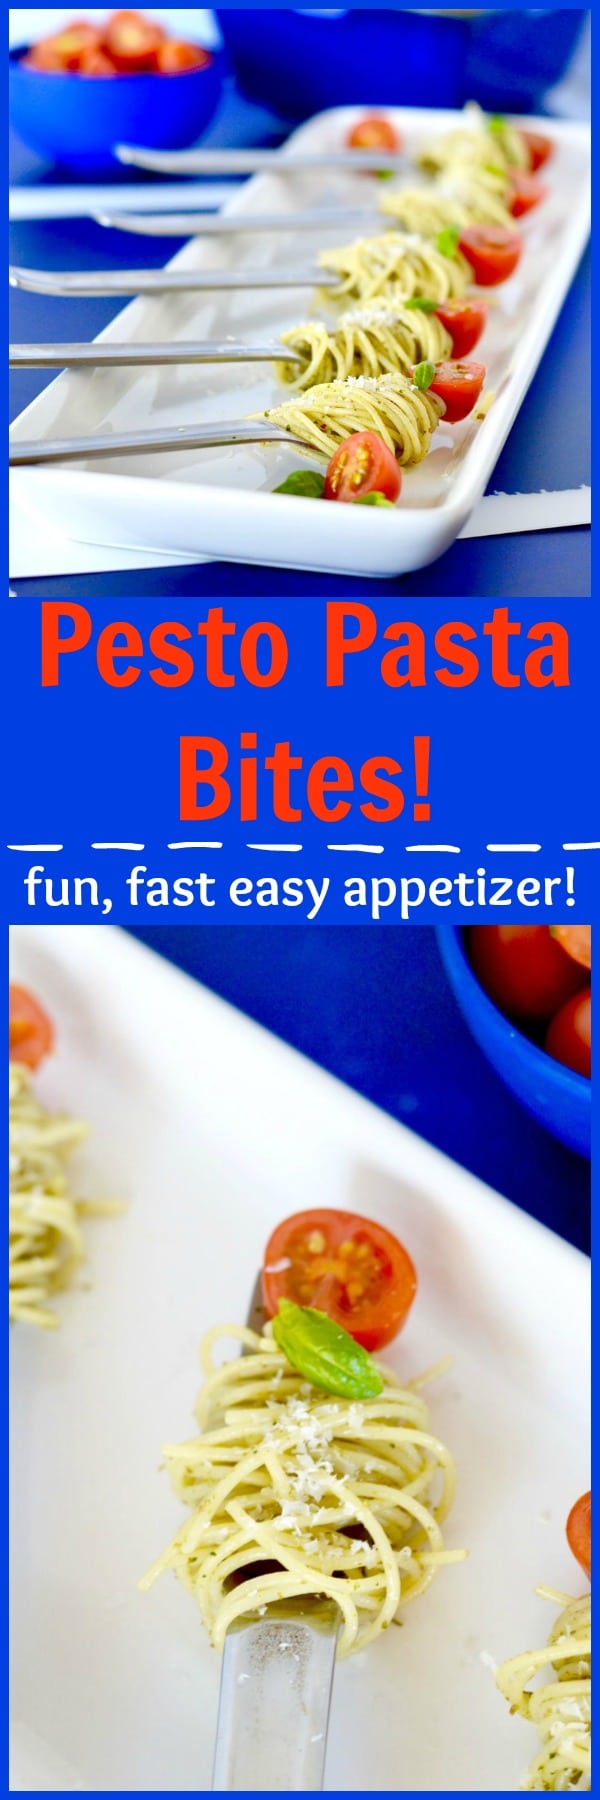 Simple to make, packed full of flavor, this recipe for Pesto Pasta Bites is a cute way to serve pasta as an appetizer! (And you can make it ahead too!)